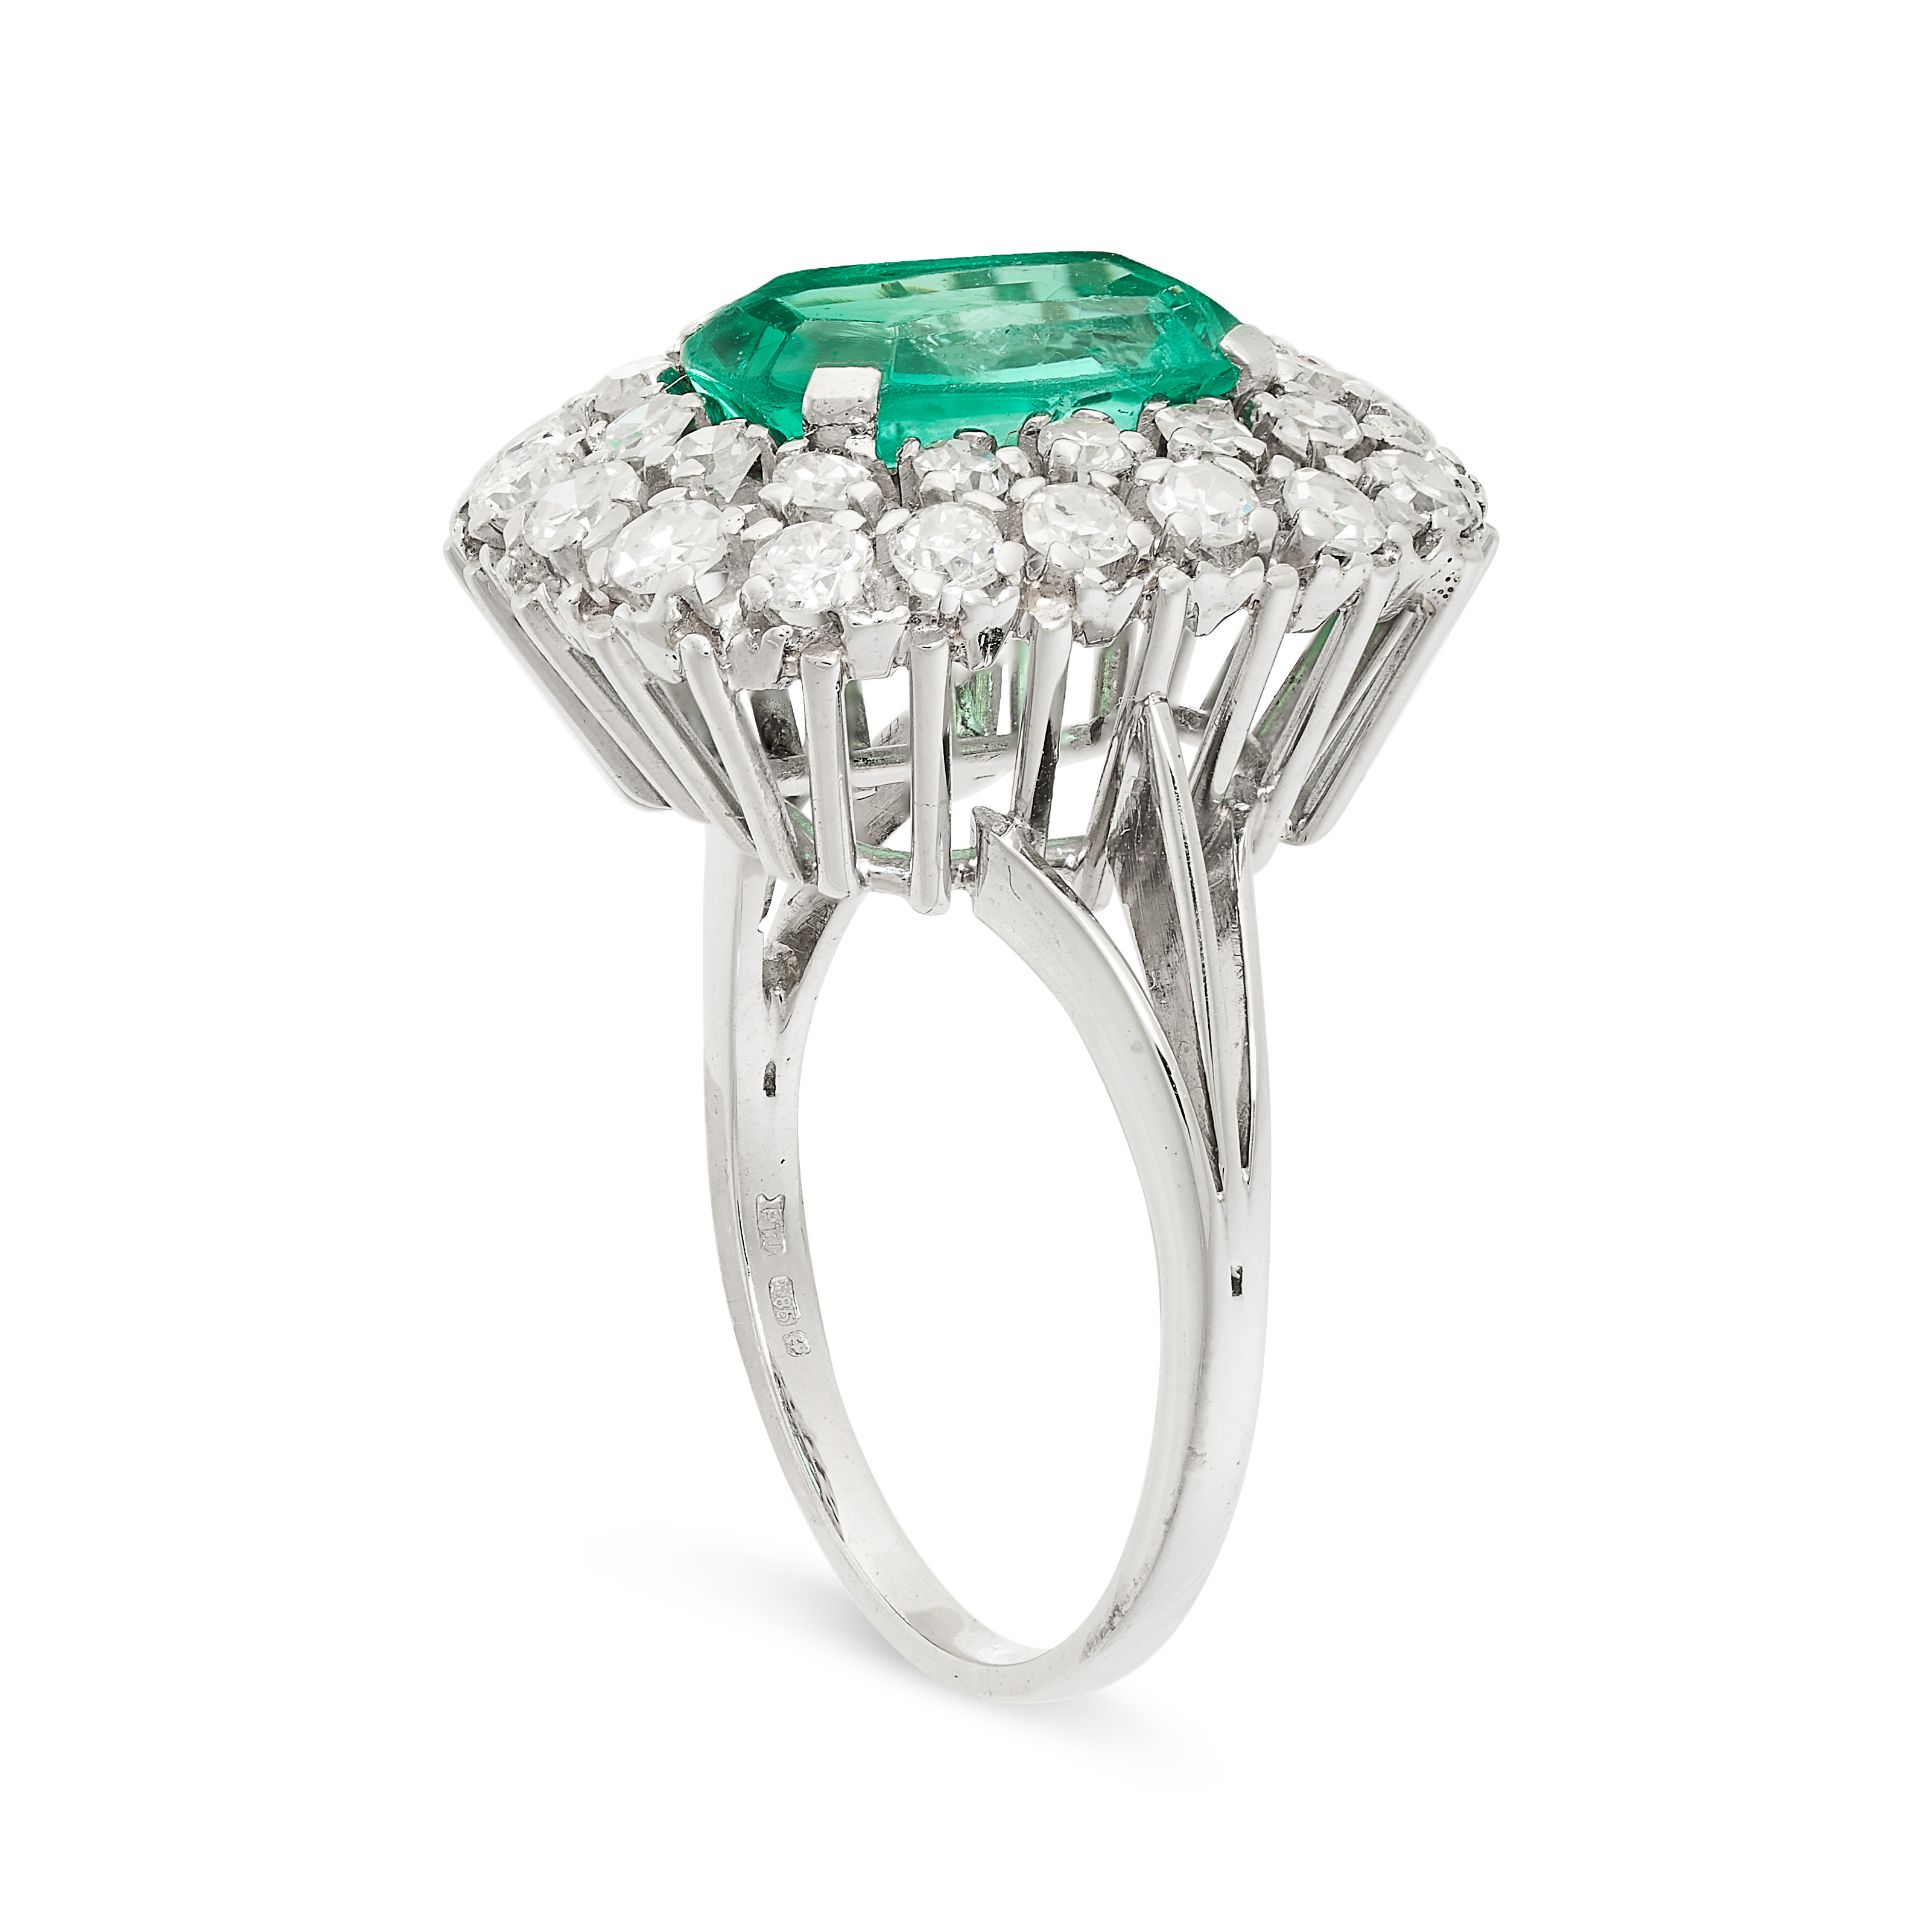 A COLOMBIAN EMERALD AND DIAMOND RING in 14ct white gold, set with an octagonal step cut emerald of - Image 2 of 2